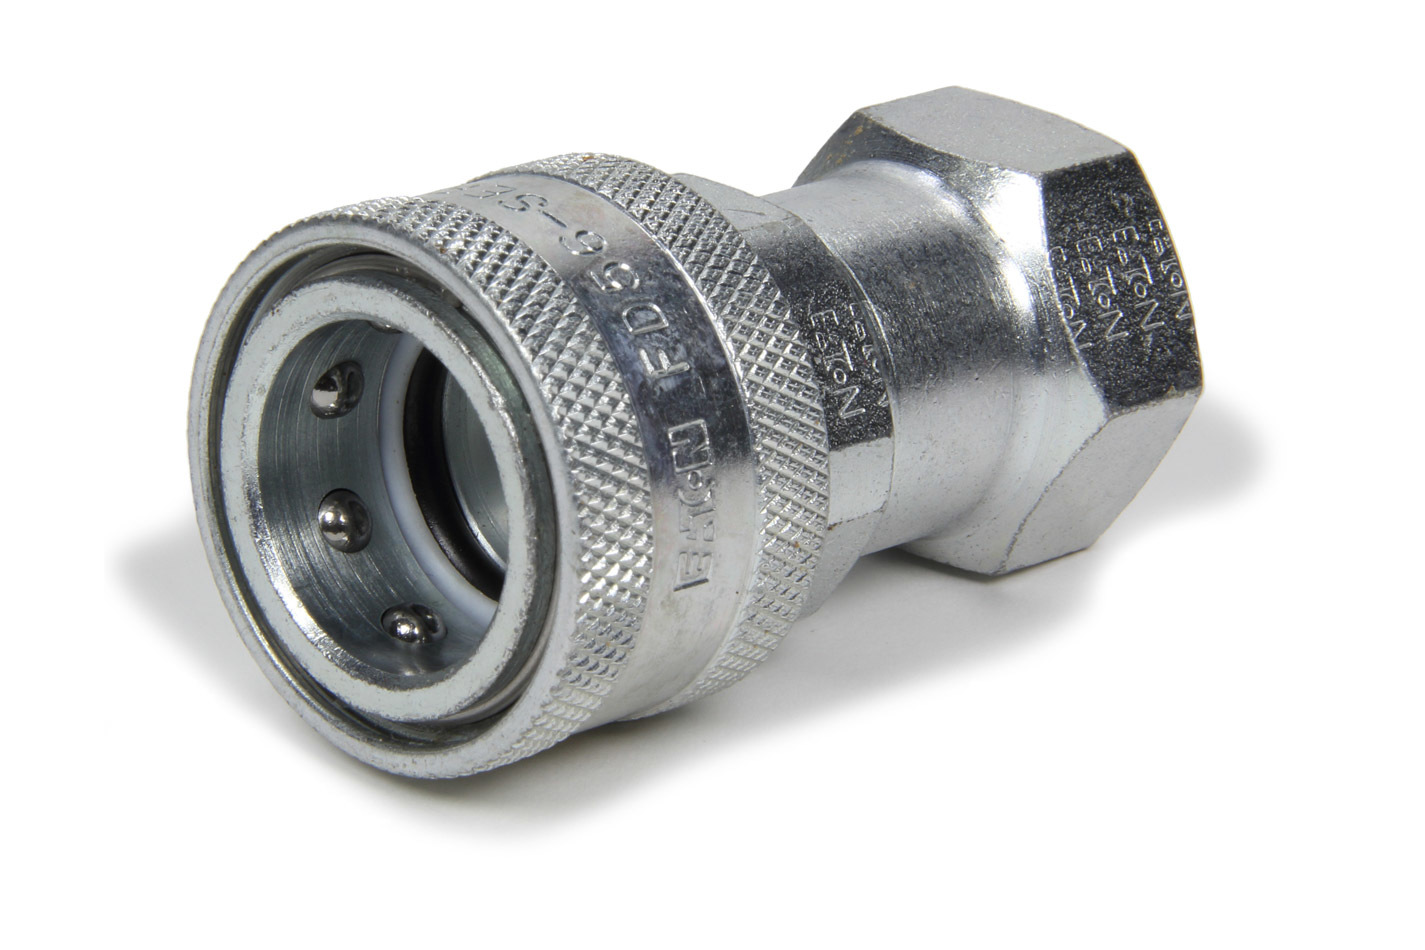 Aeroquip FBM3113 - Fitting, Quick Disconnect, Radiator Refill Coupling, Female Half to 1/2 in NPT, Steel, Zinc Plated, Each